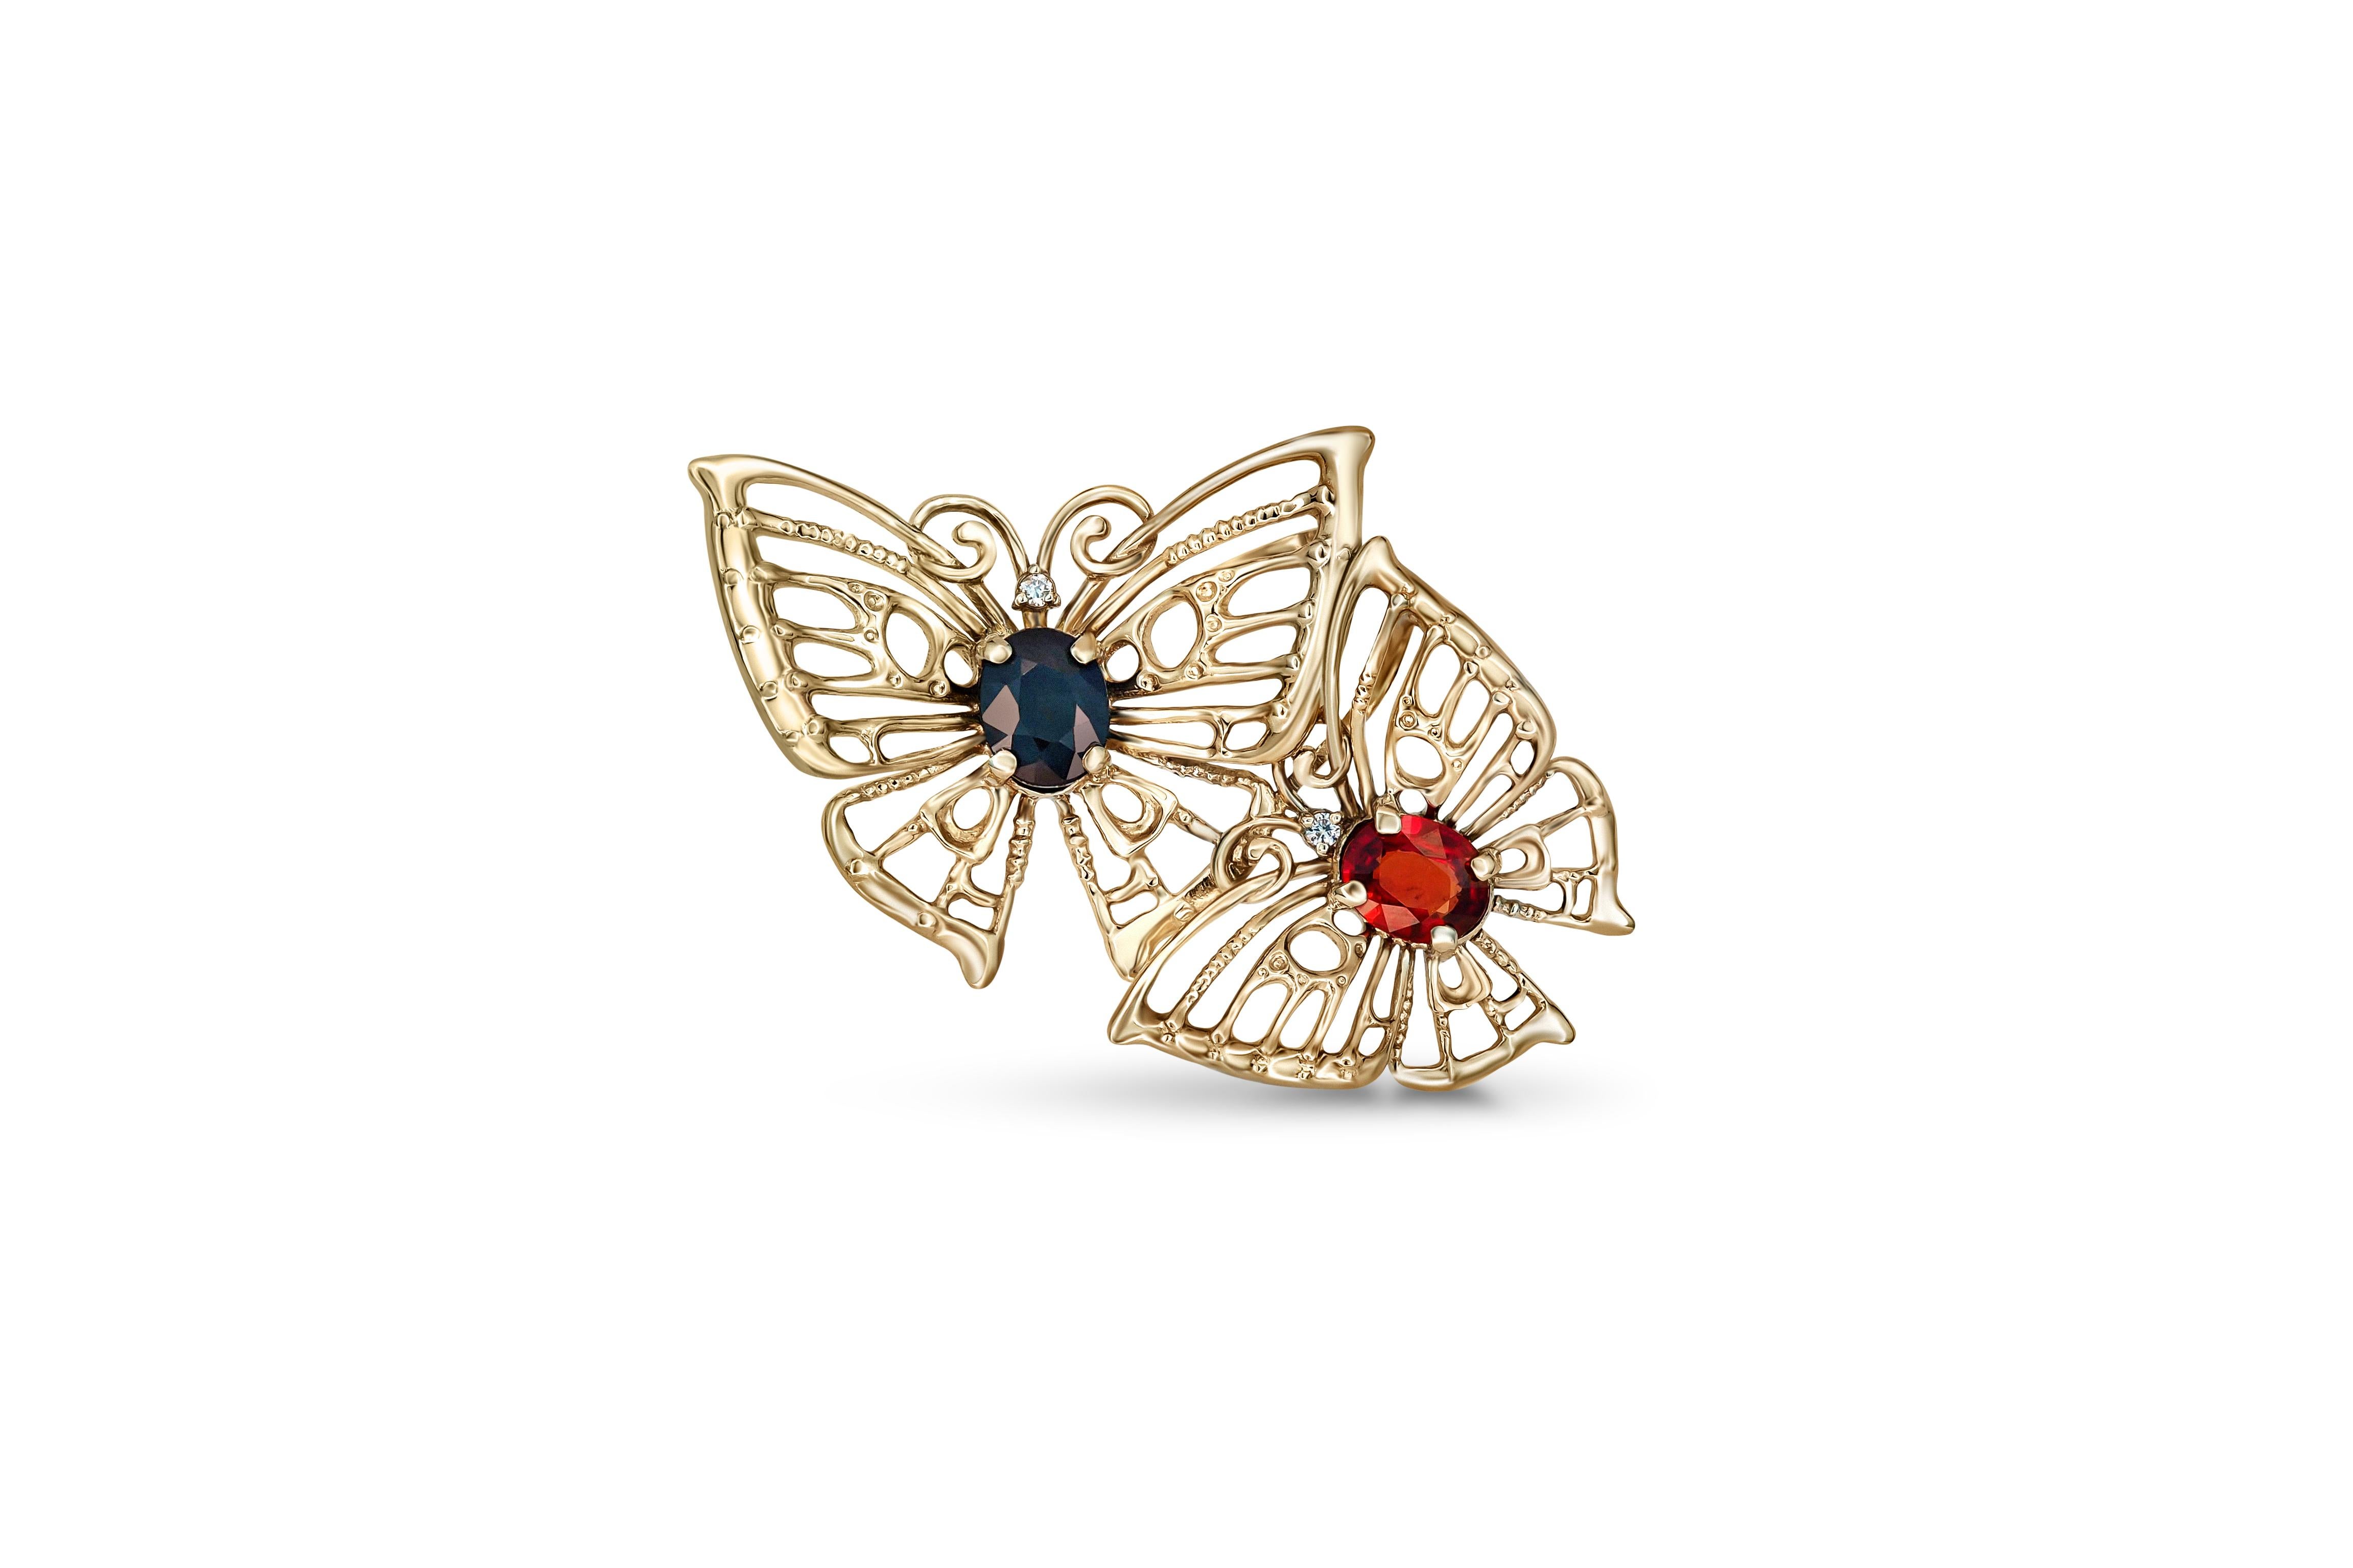 Butterfly pendant with sapphires in 14k gold. 
Two Butterfly pendant. Red, blue sapphires gold pendant. Oval sapphires pendant.

Metal: 14k gold
32x20.5 mm size
Weight 2.30 gr.

Gemstones: 
Sapphire: 0.8 ct, blue color, transparent with inclusions,